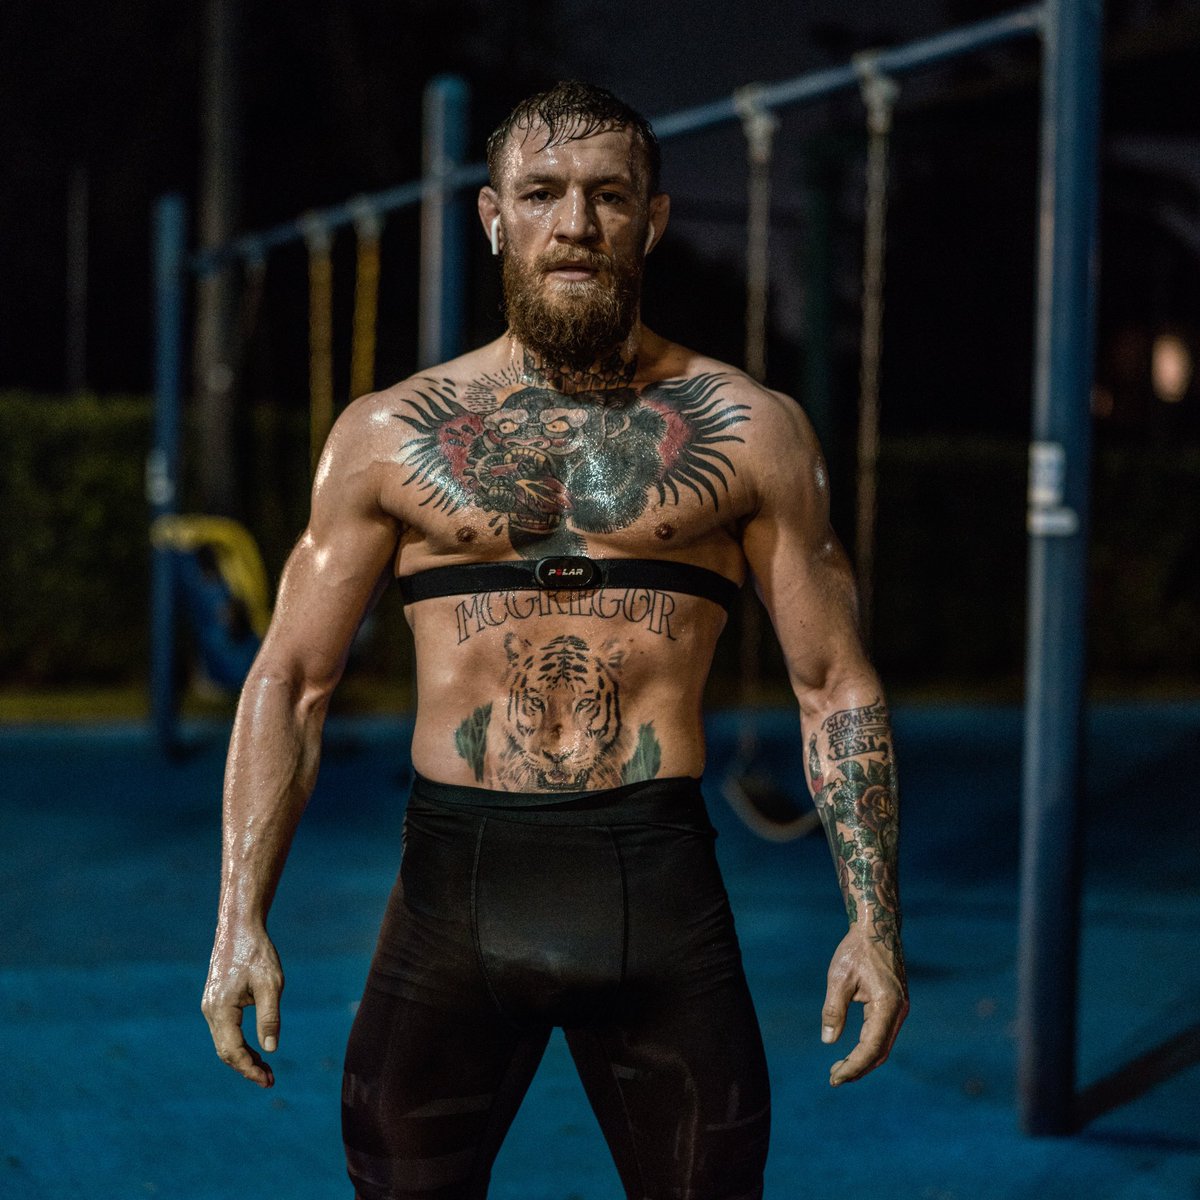 The most tested athlete. 48 times. 
All natural animal. @McGregorFast https://t.co/kPeSdxgwBj